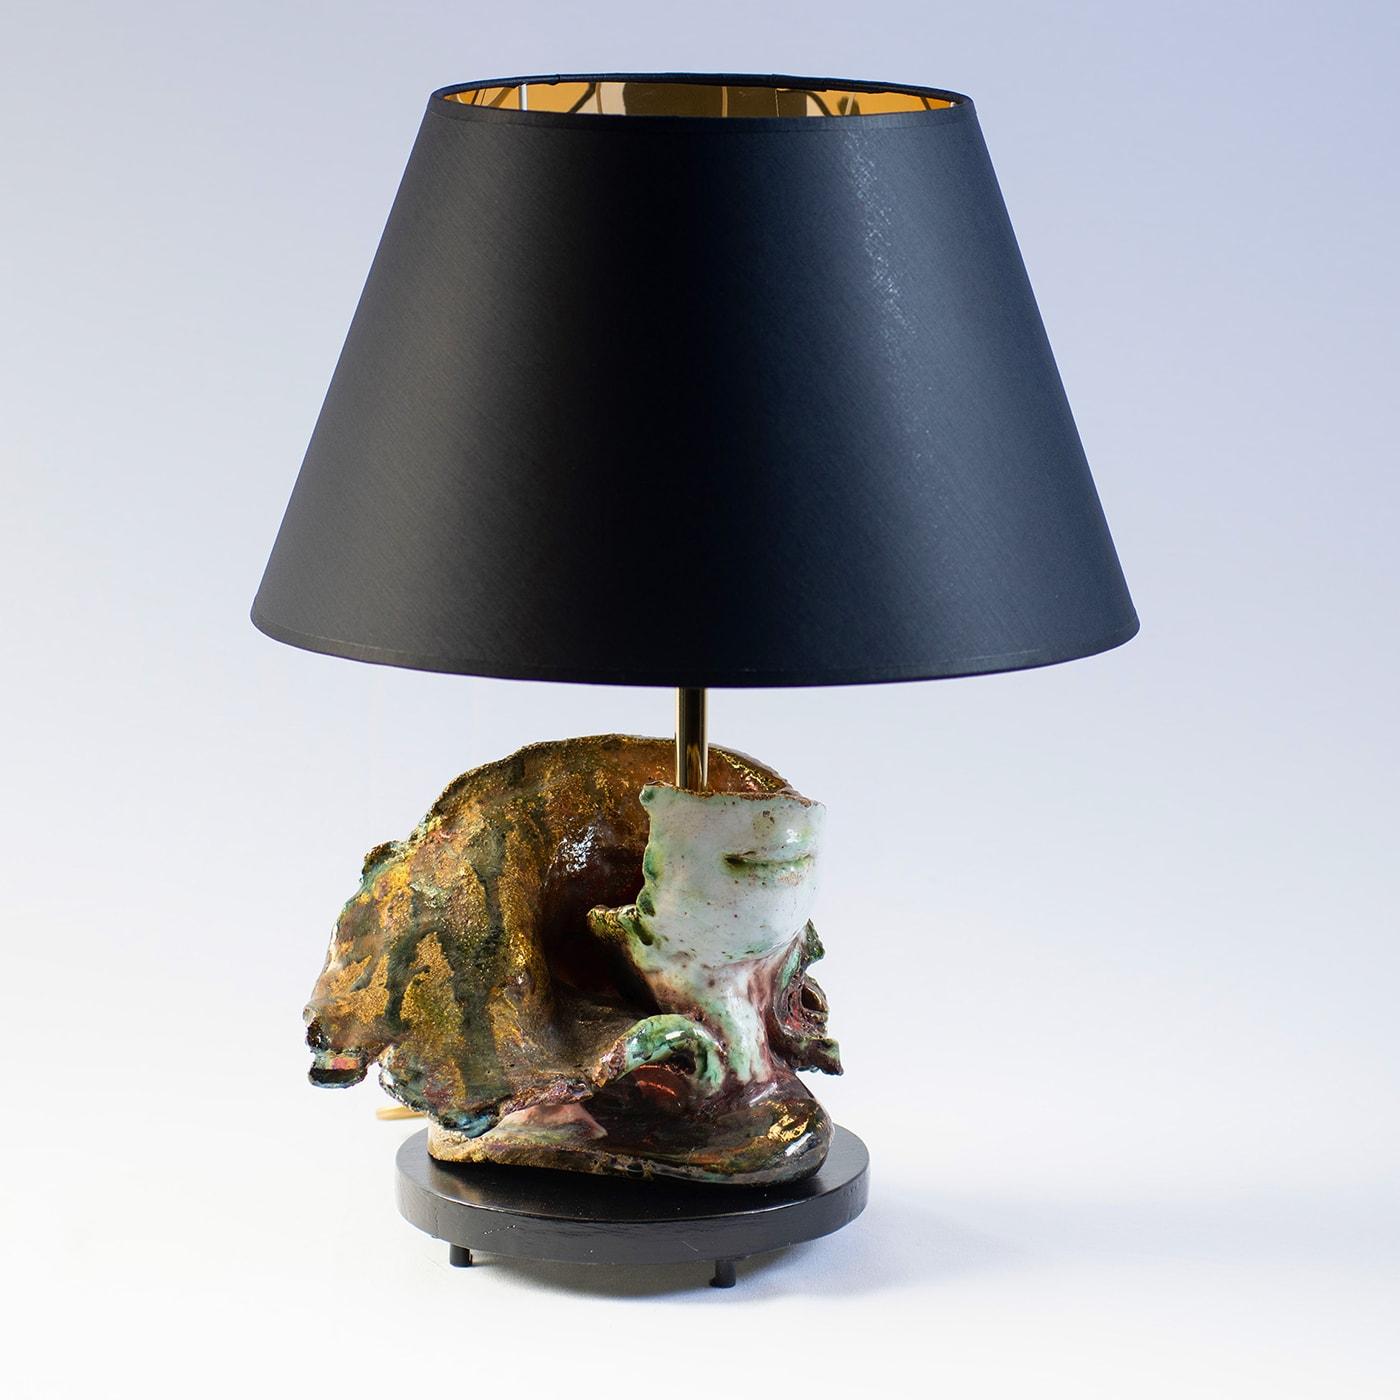 Topped by a timelessly elegant conical shade that is black con the outside and glossy gold on the inside, this table lamp is a unique work of art by artist Angelo Salemi. A circular, footed wooden base finished in polished black sustains the